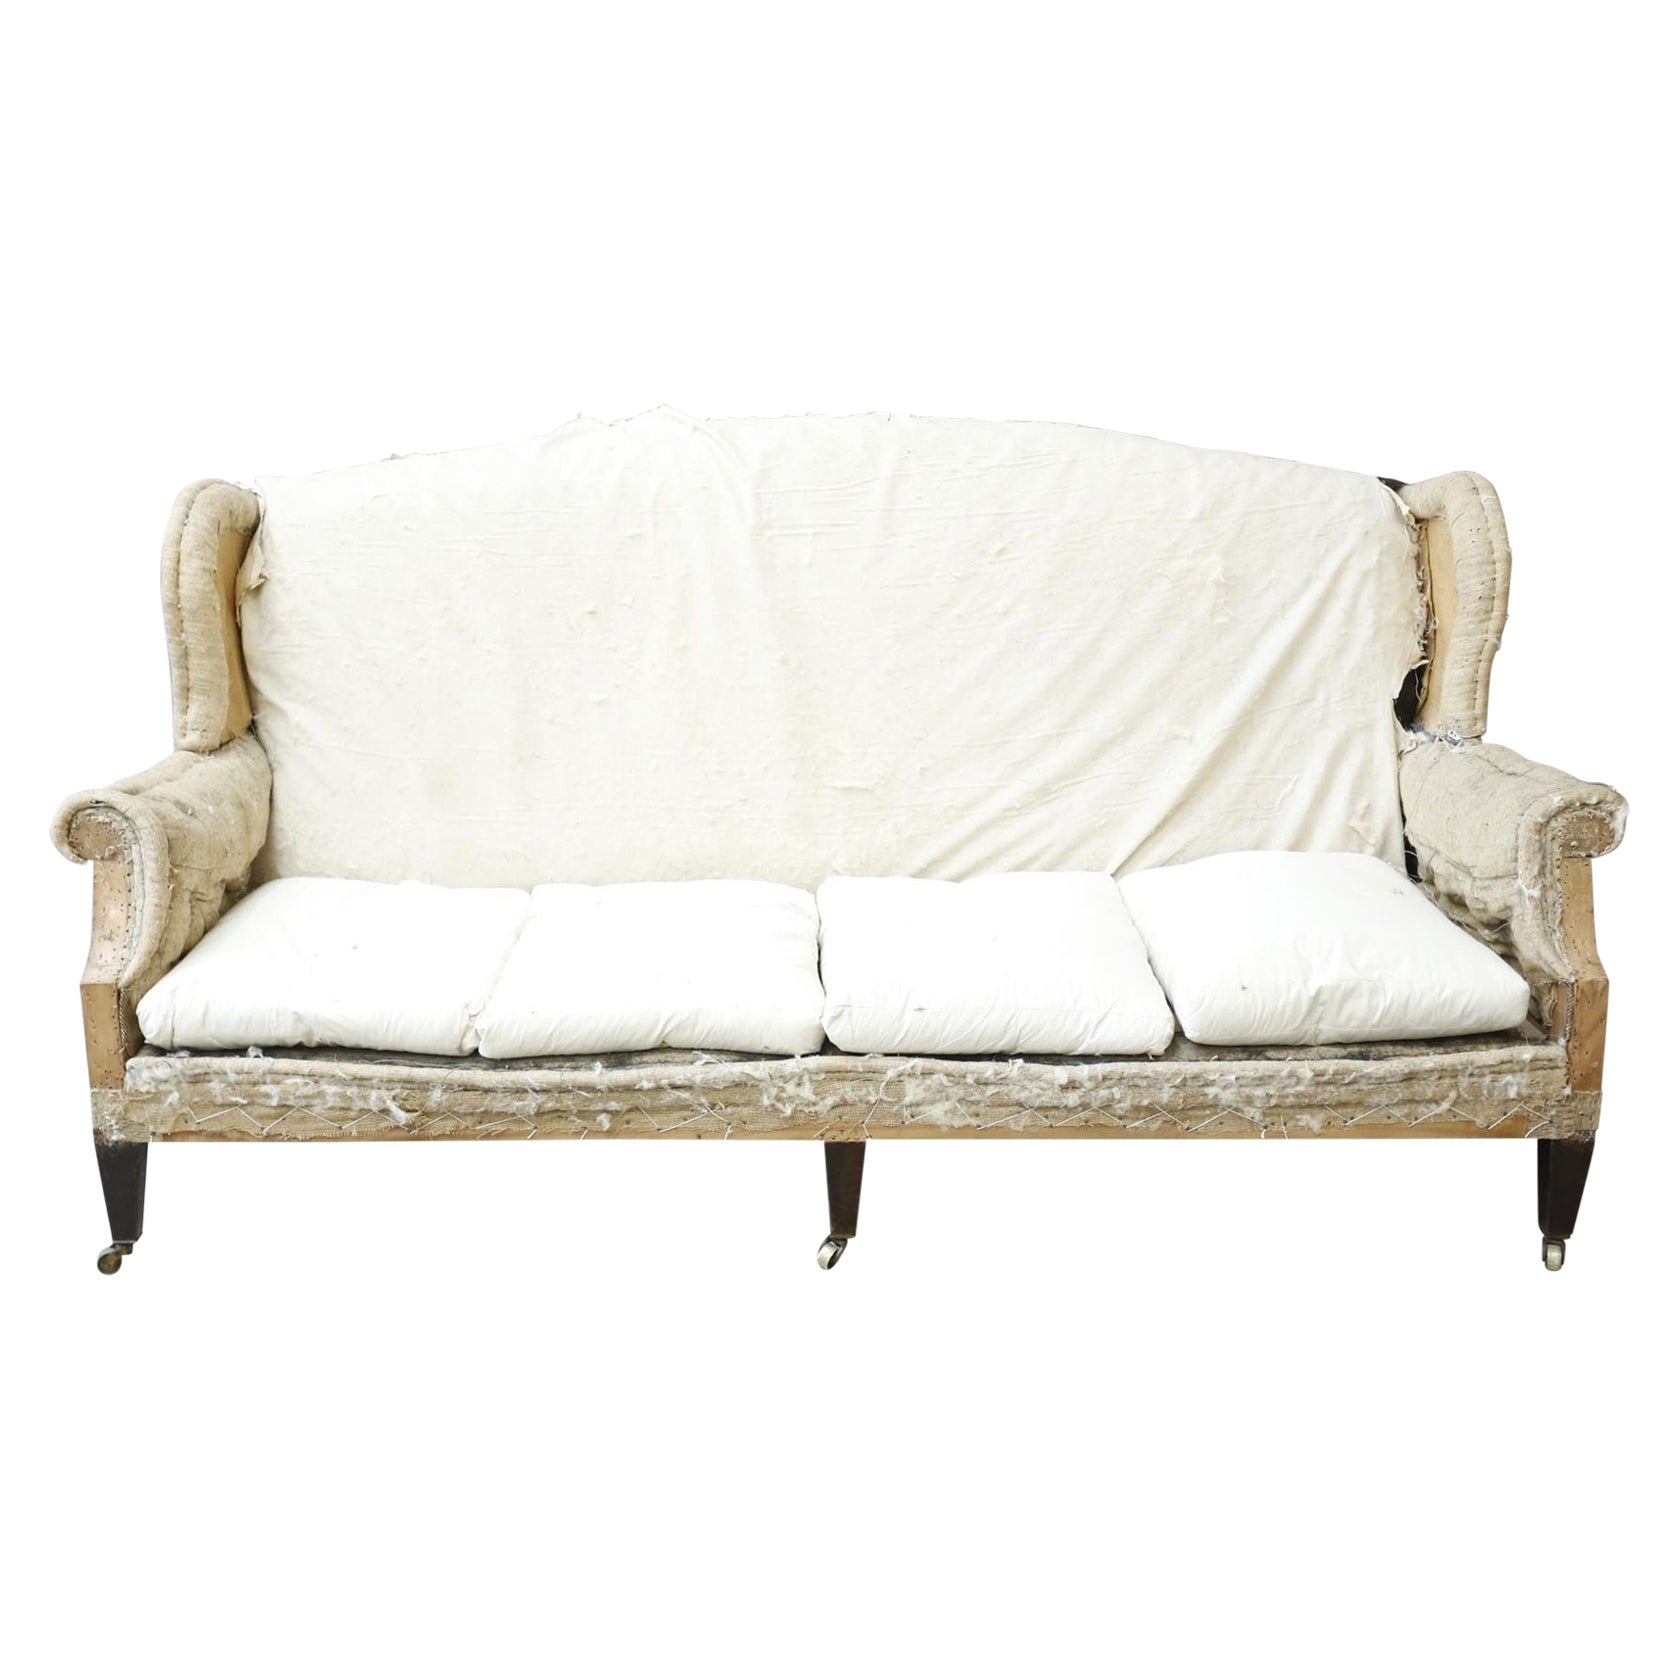 Victorian Wingback English country house sofa